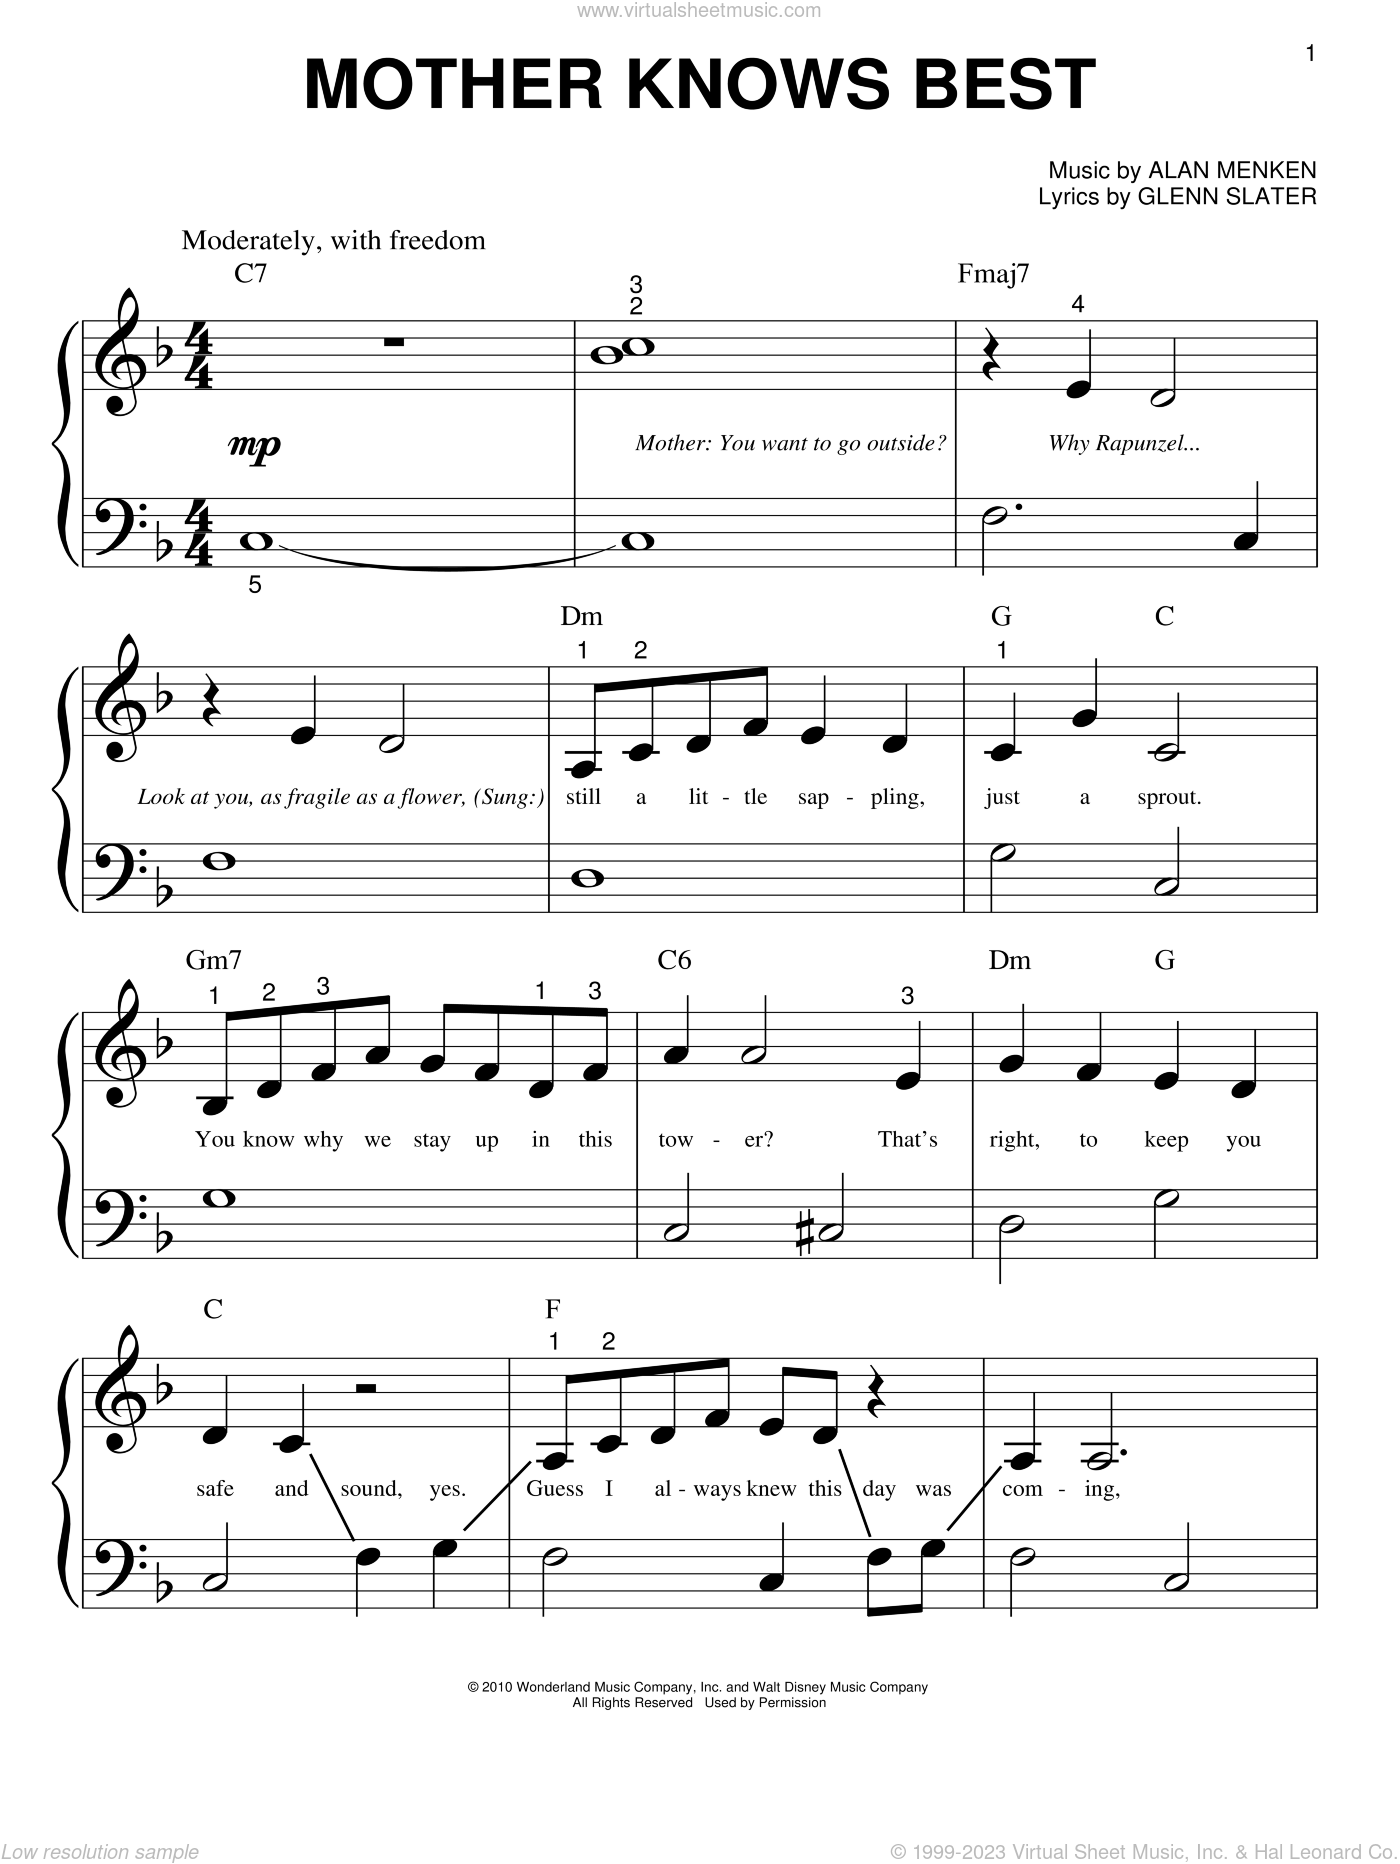 Murphy - Mother Knows Best (from Disney's Tangled) sheet music for